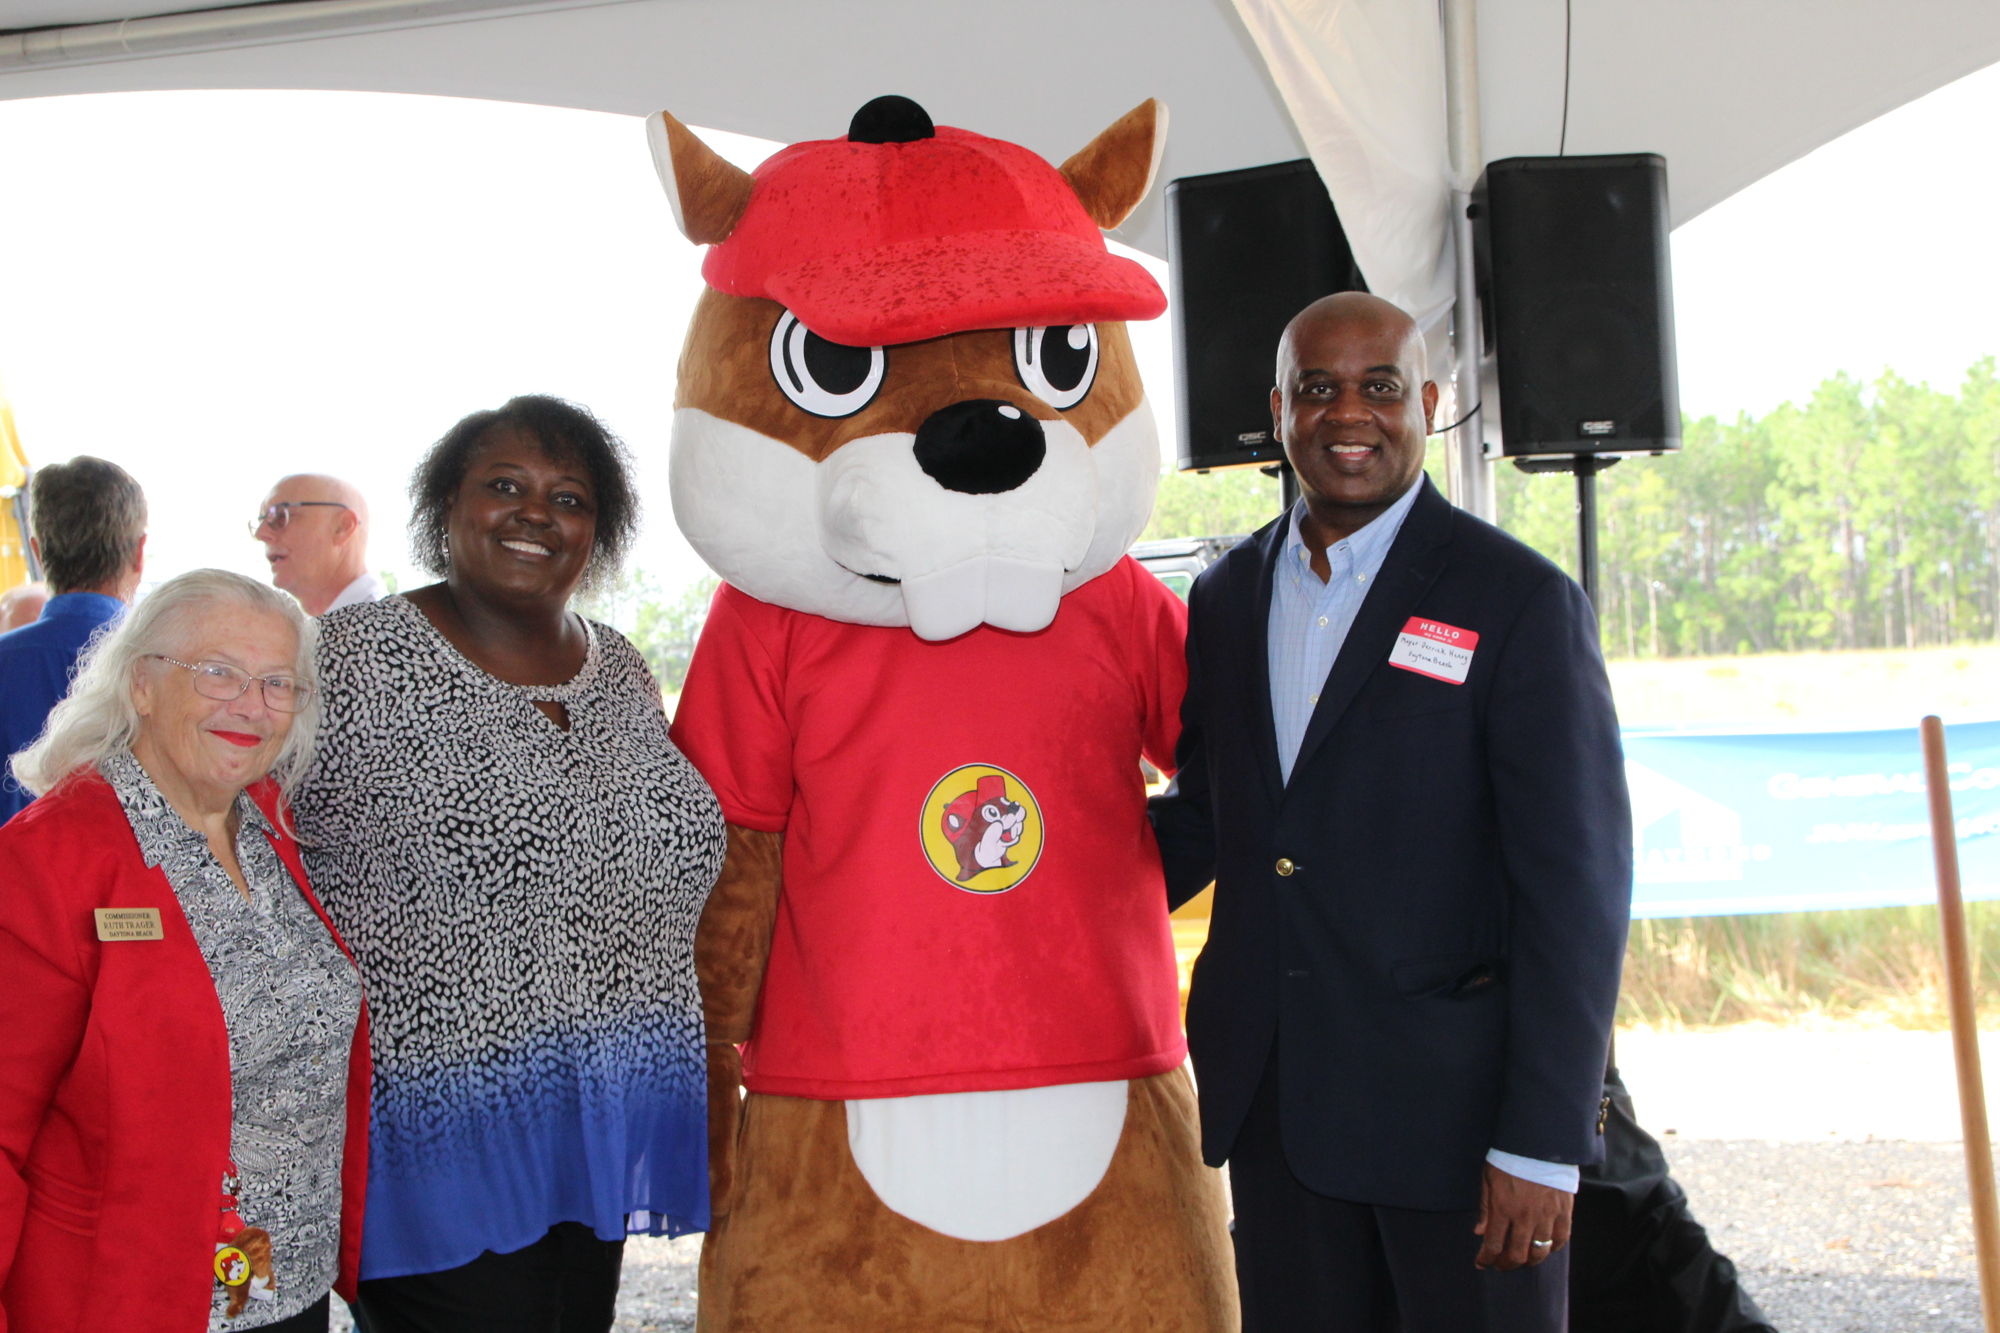 Daytona city commissioners Ruth Trager and Paula Young pose with Buc-ee Beaver and Daytona Mayor Derrick Henry. Photo by Tanya Russo